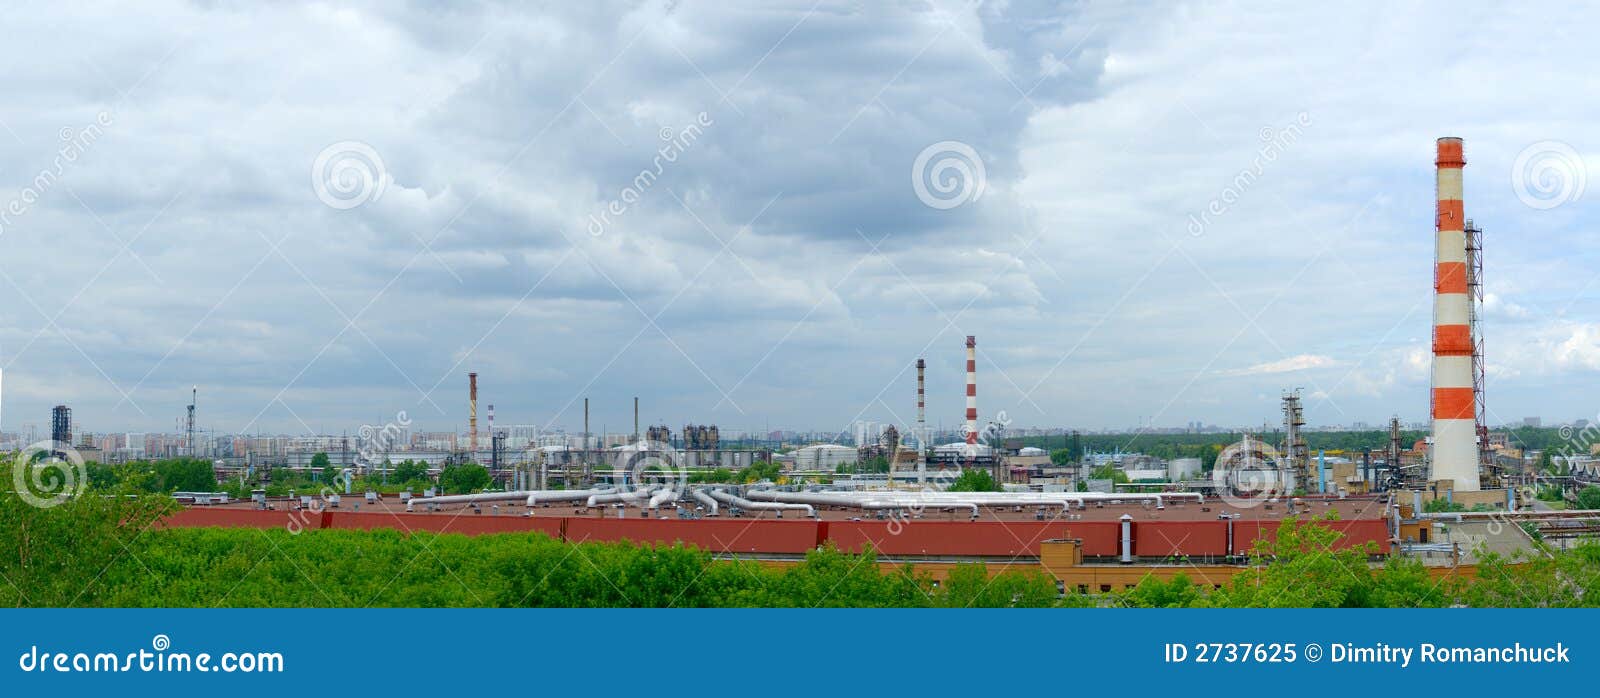 Oil Refinery Plant Royalty Free Stock Photo - Image: 2737625